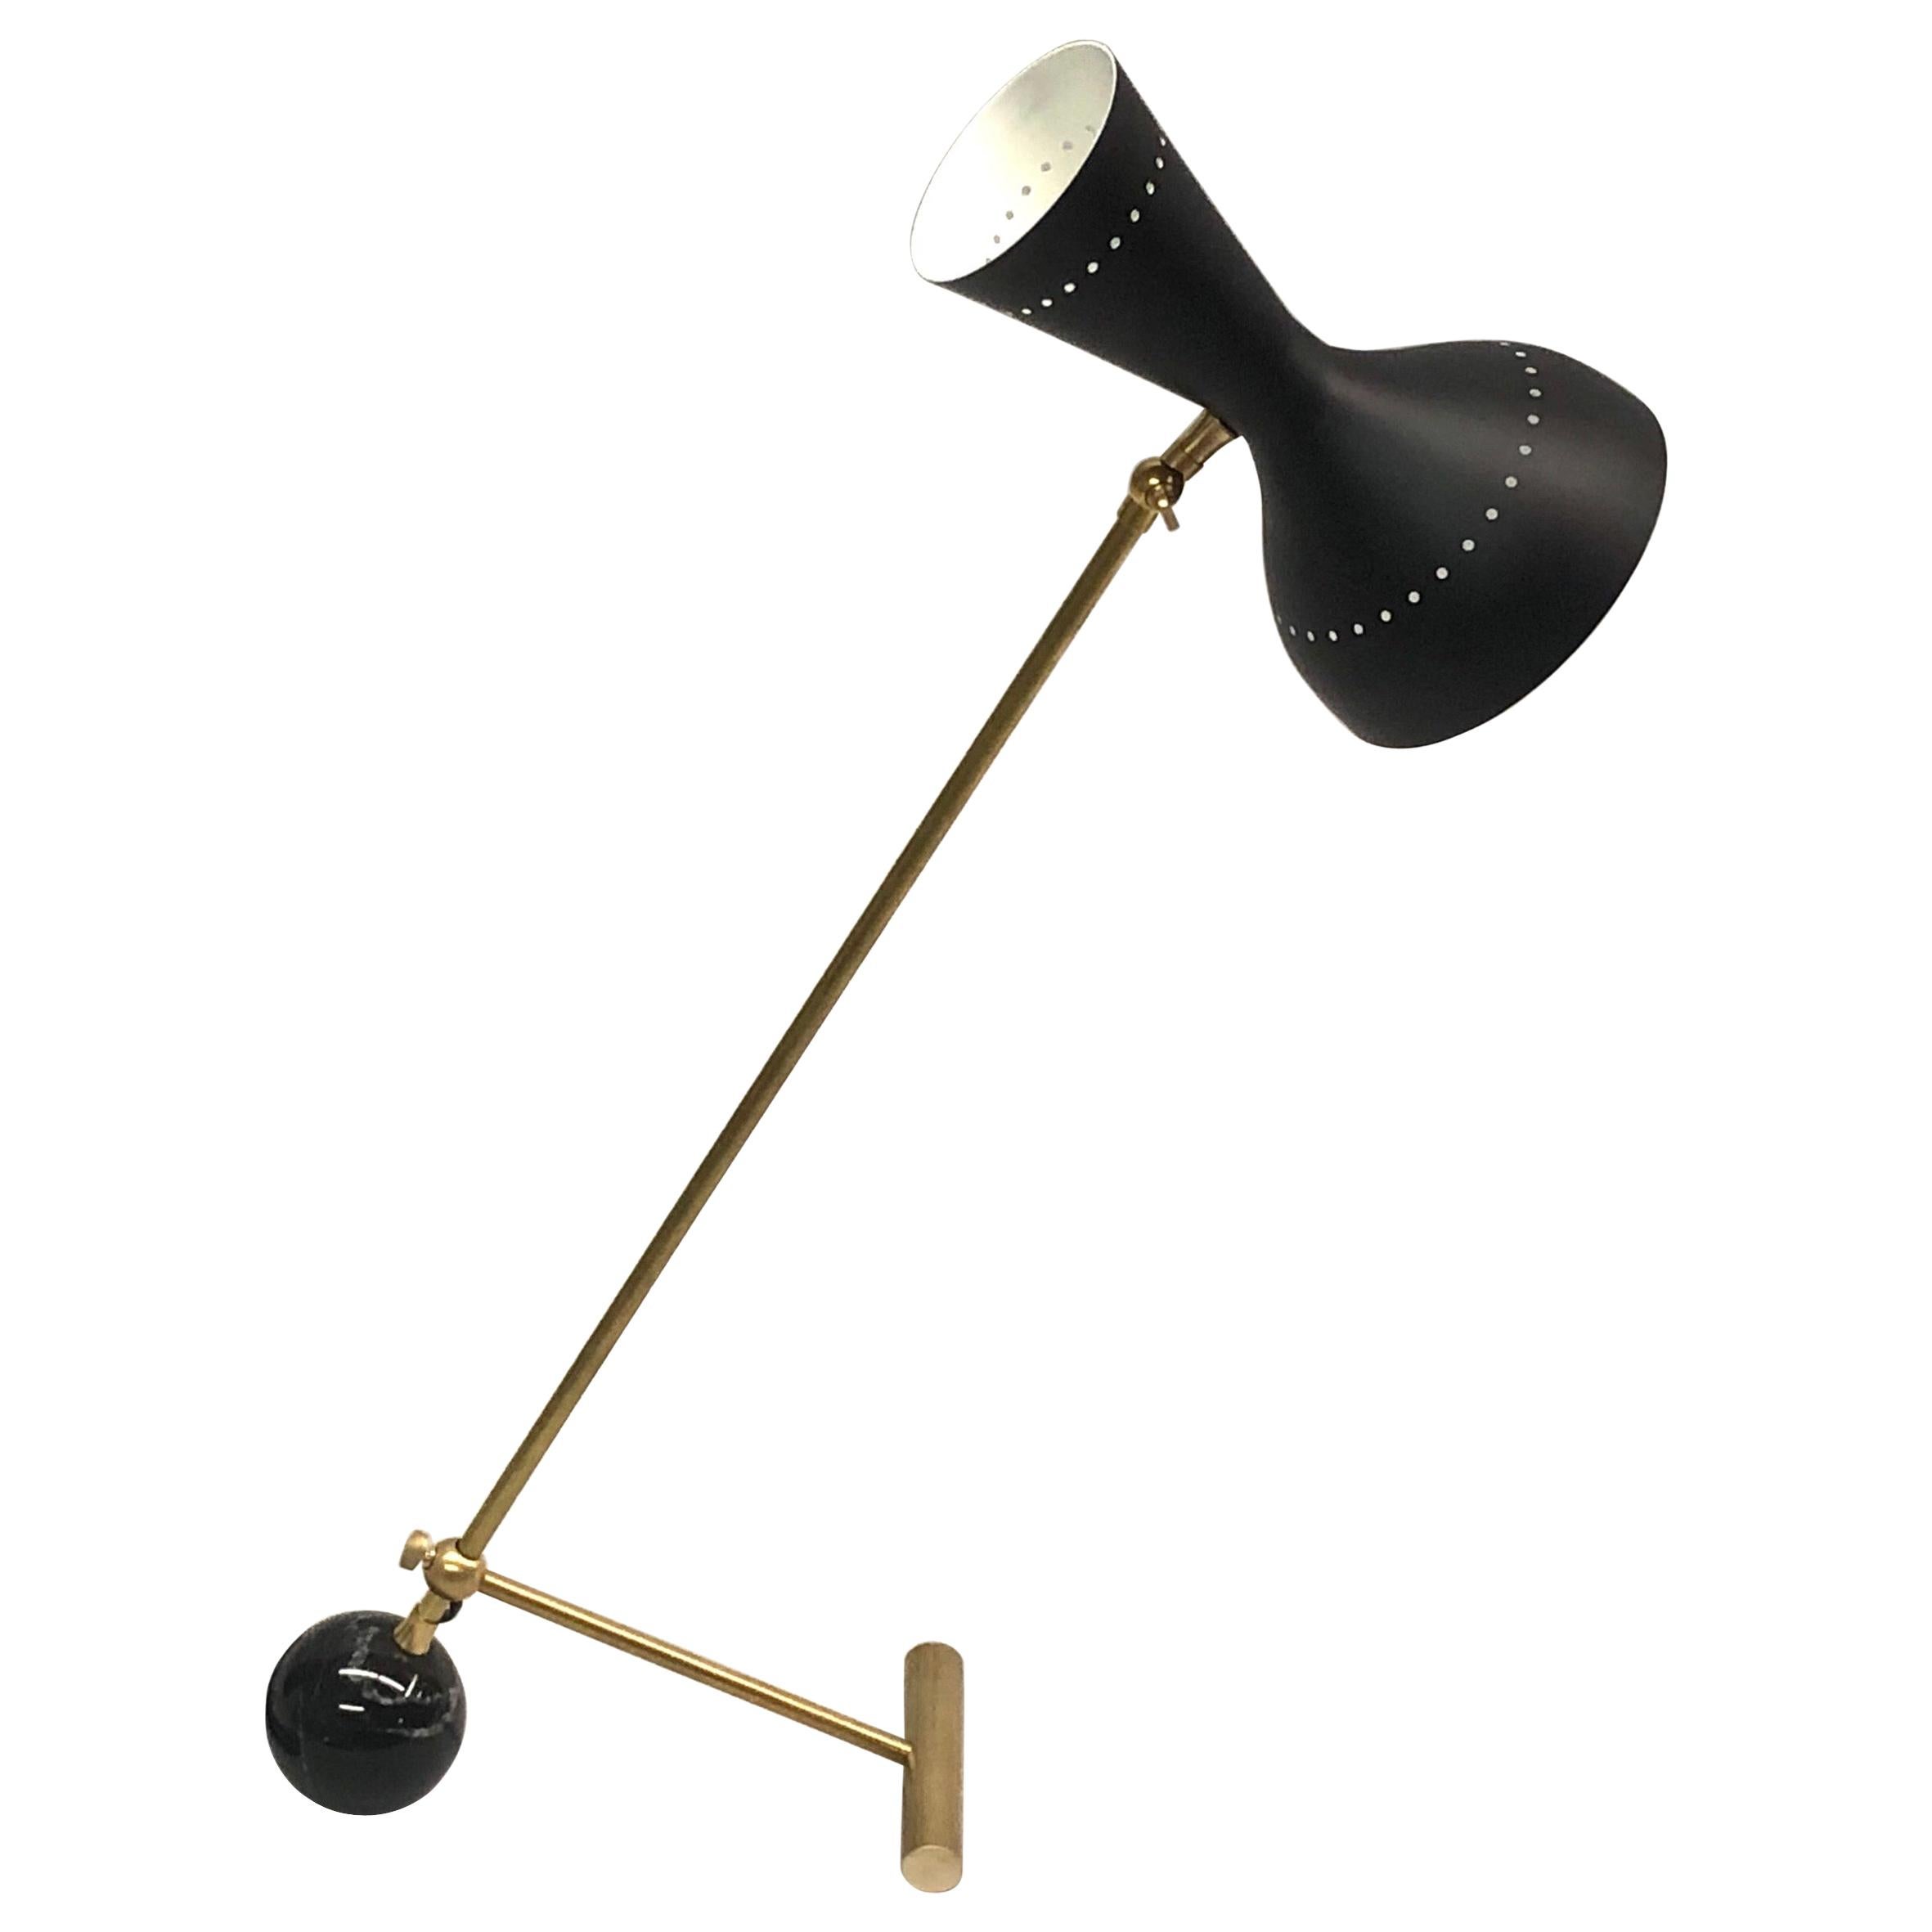 Italian Midcentury Brass Articulating and Counter-Balance Desk Lamp, Arredoluce For Sale